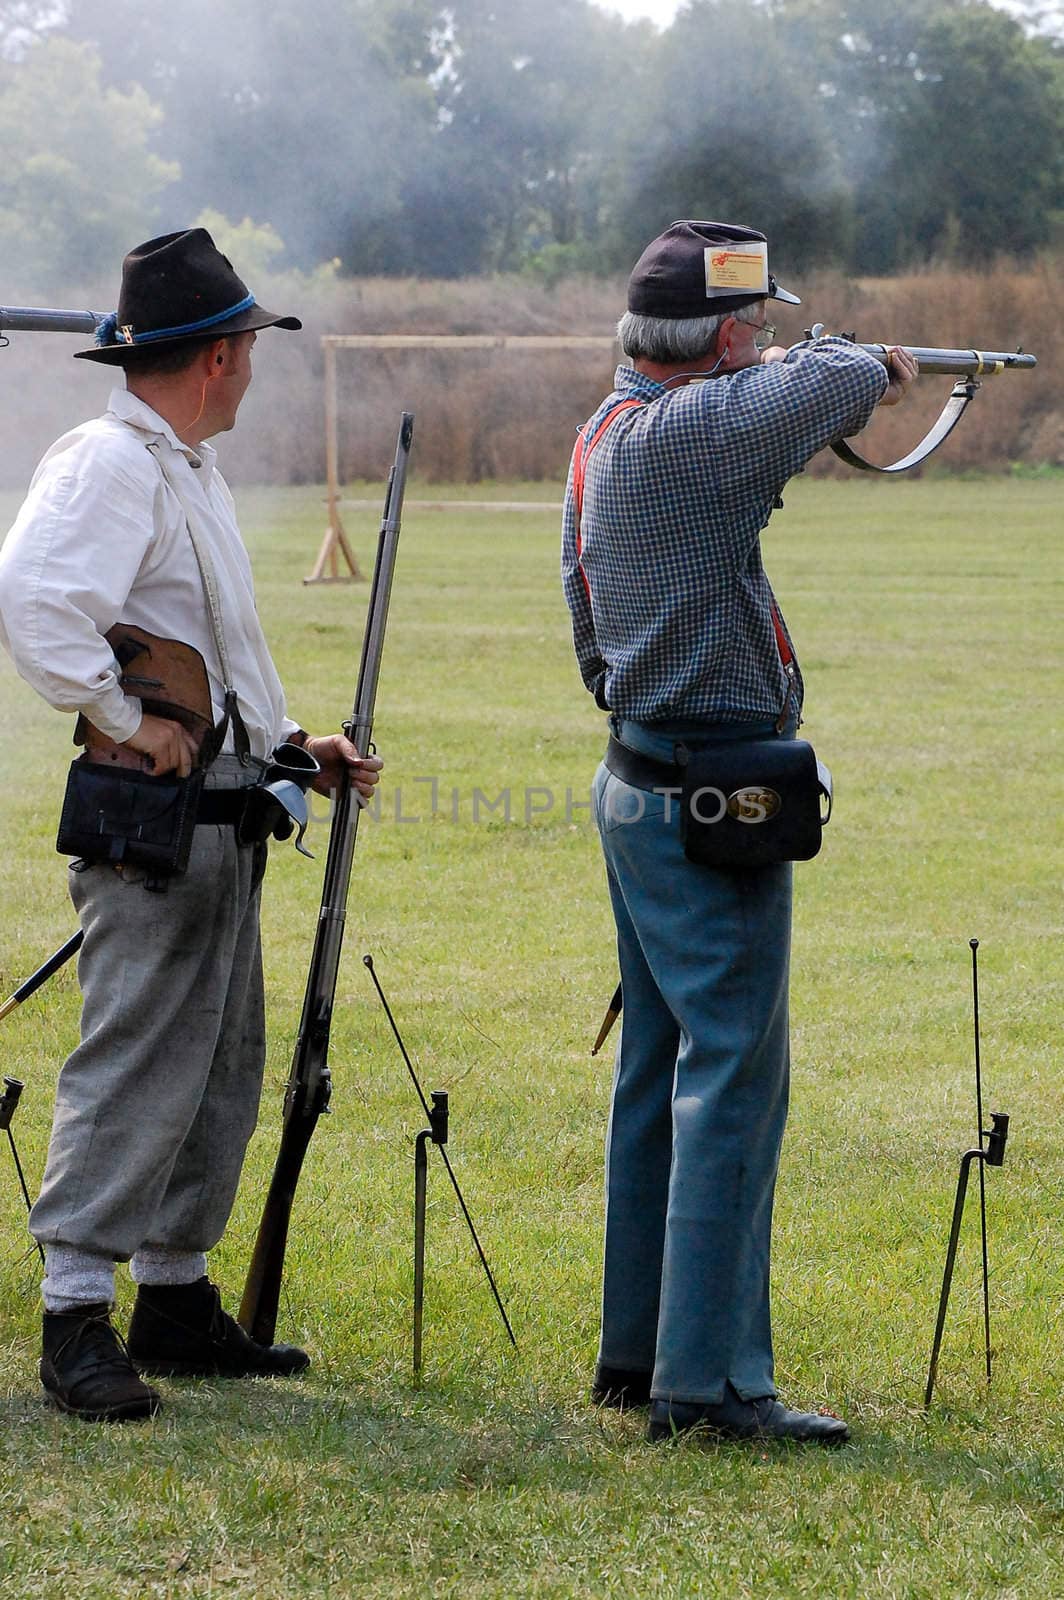 Shooting and Reloading by RefocusPhoto